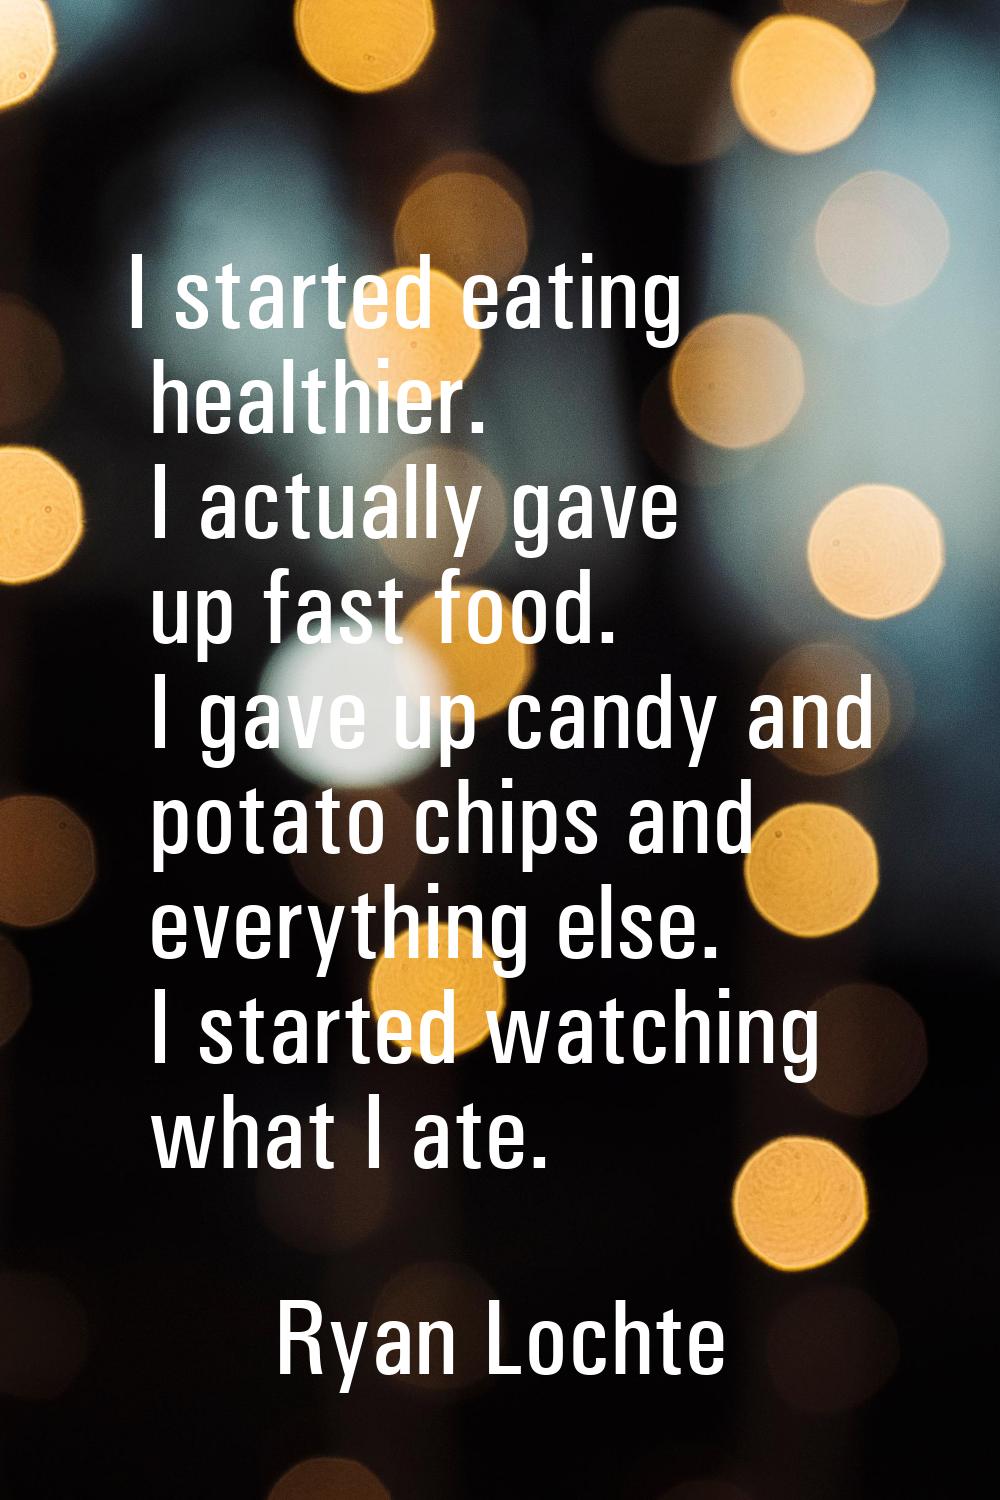 I started eating healthier. I actually gave up fast food. I gave up candy and potato chips and ever